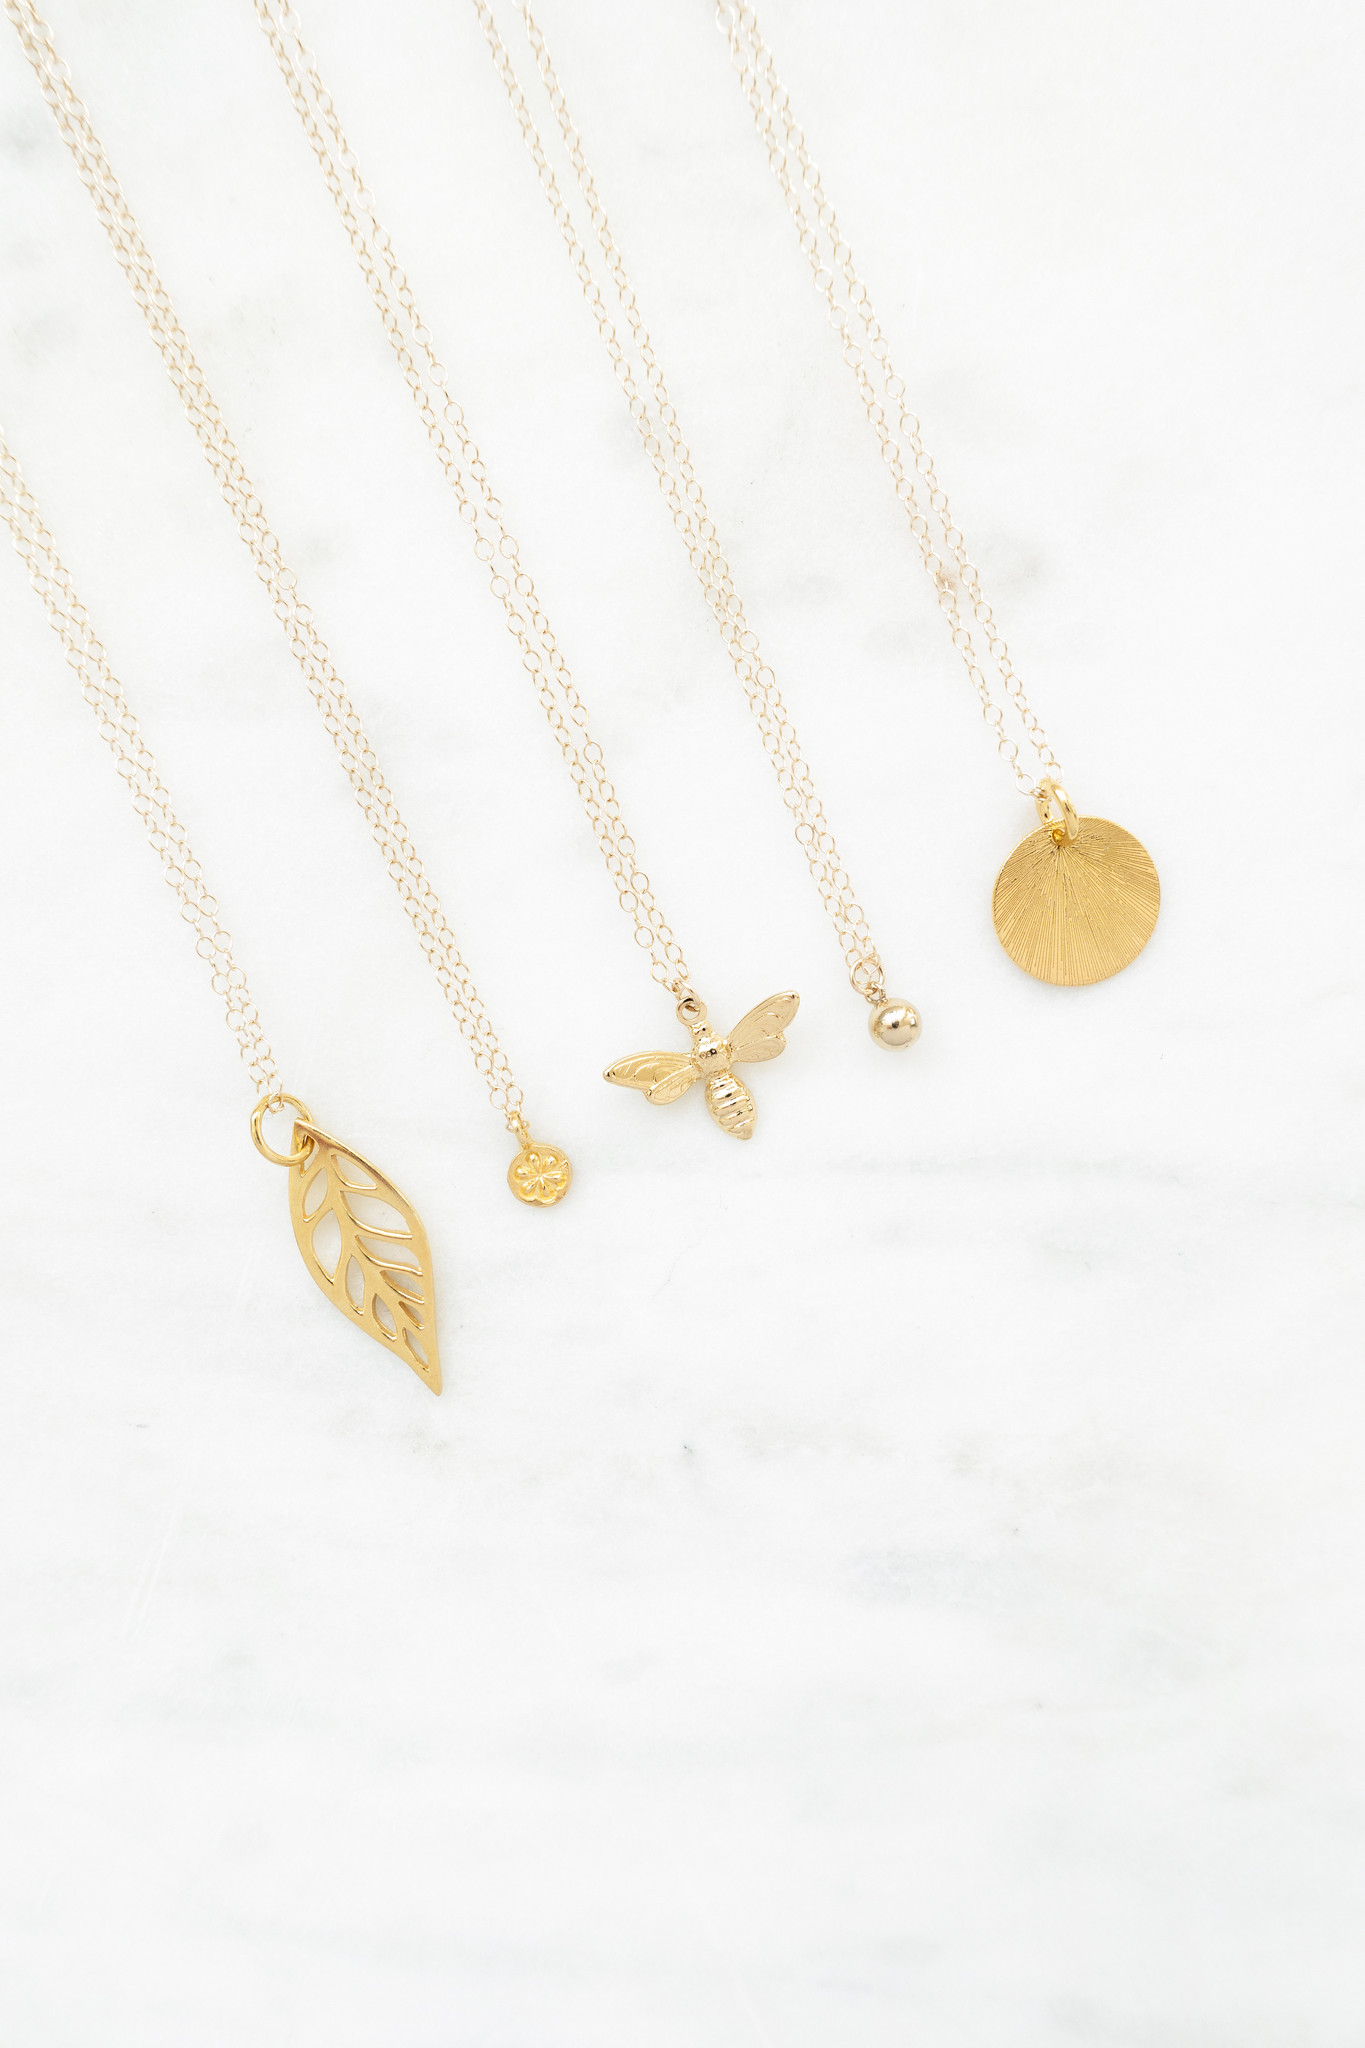 Sustainable Jewellery: Recycled Gold